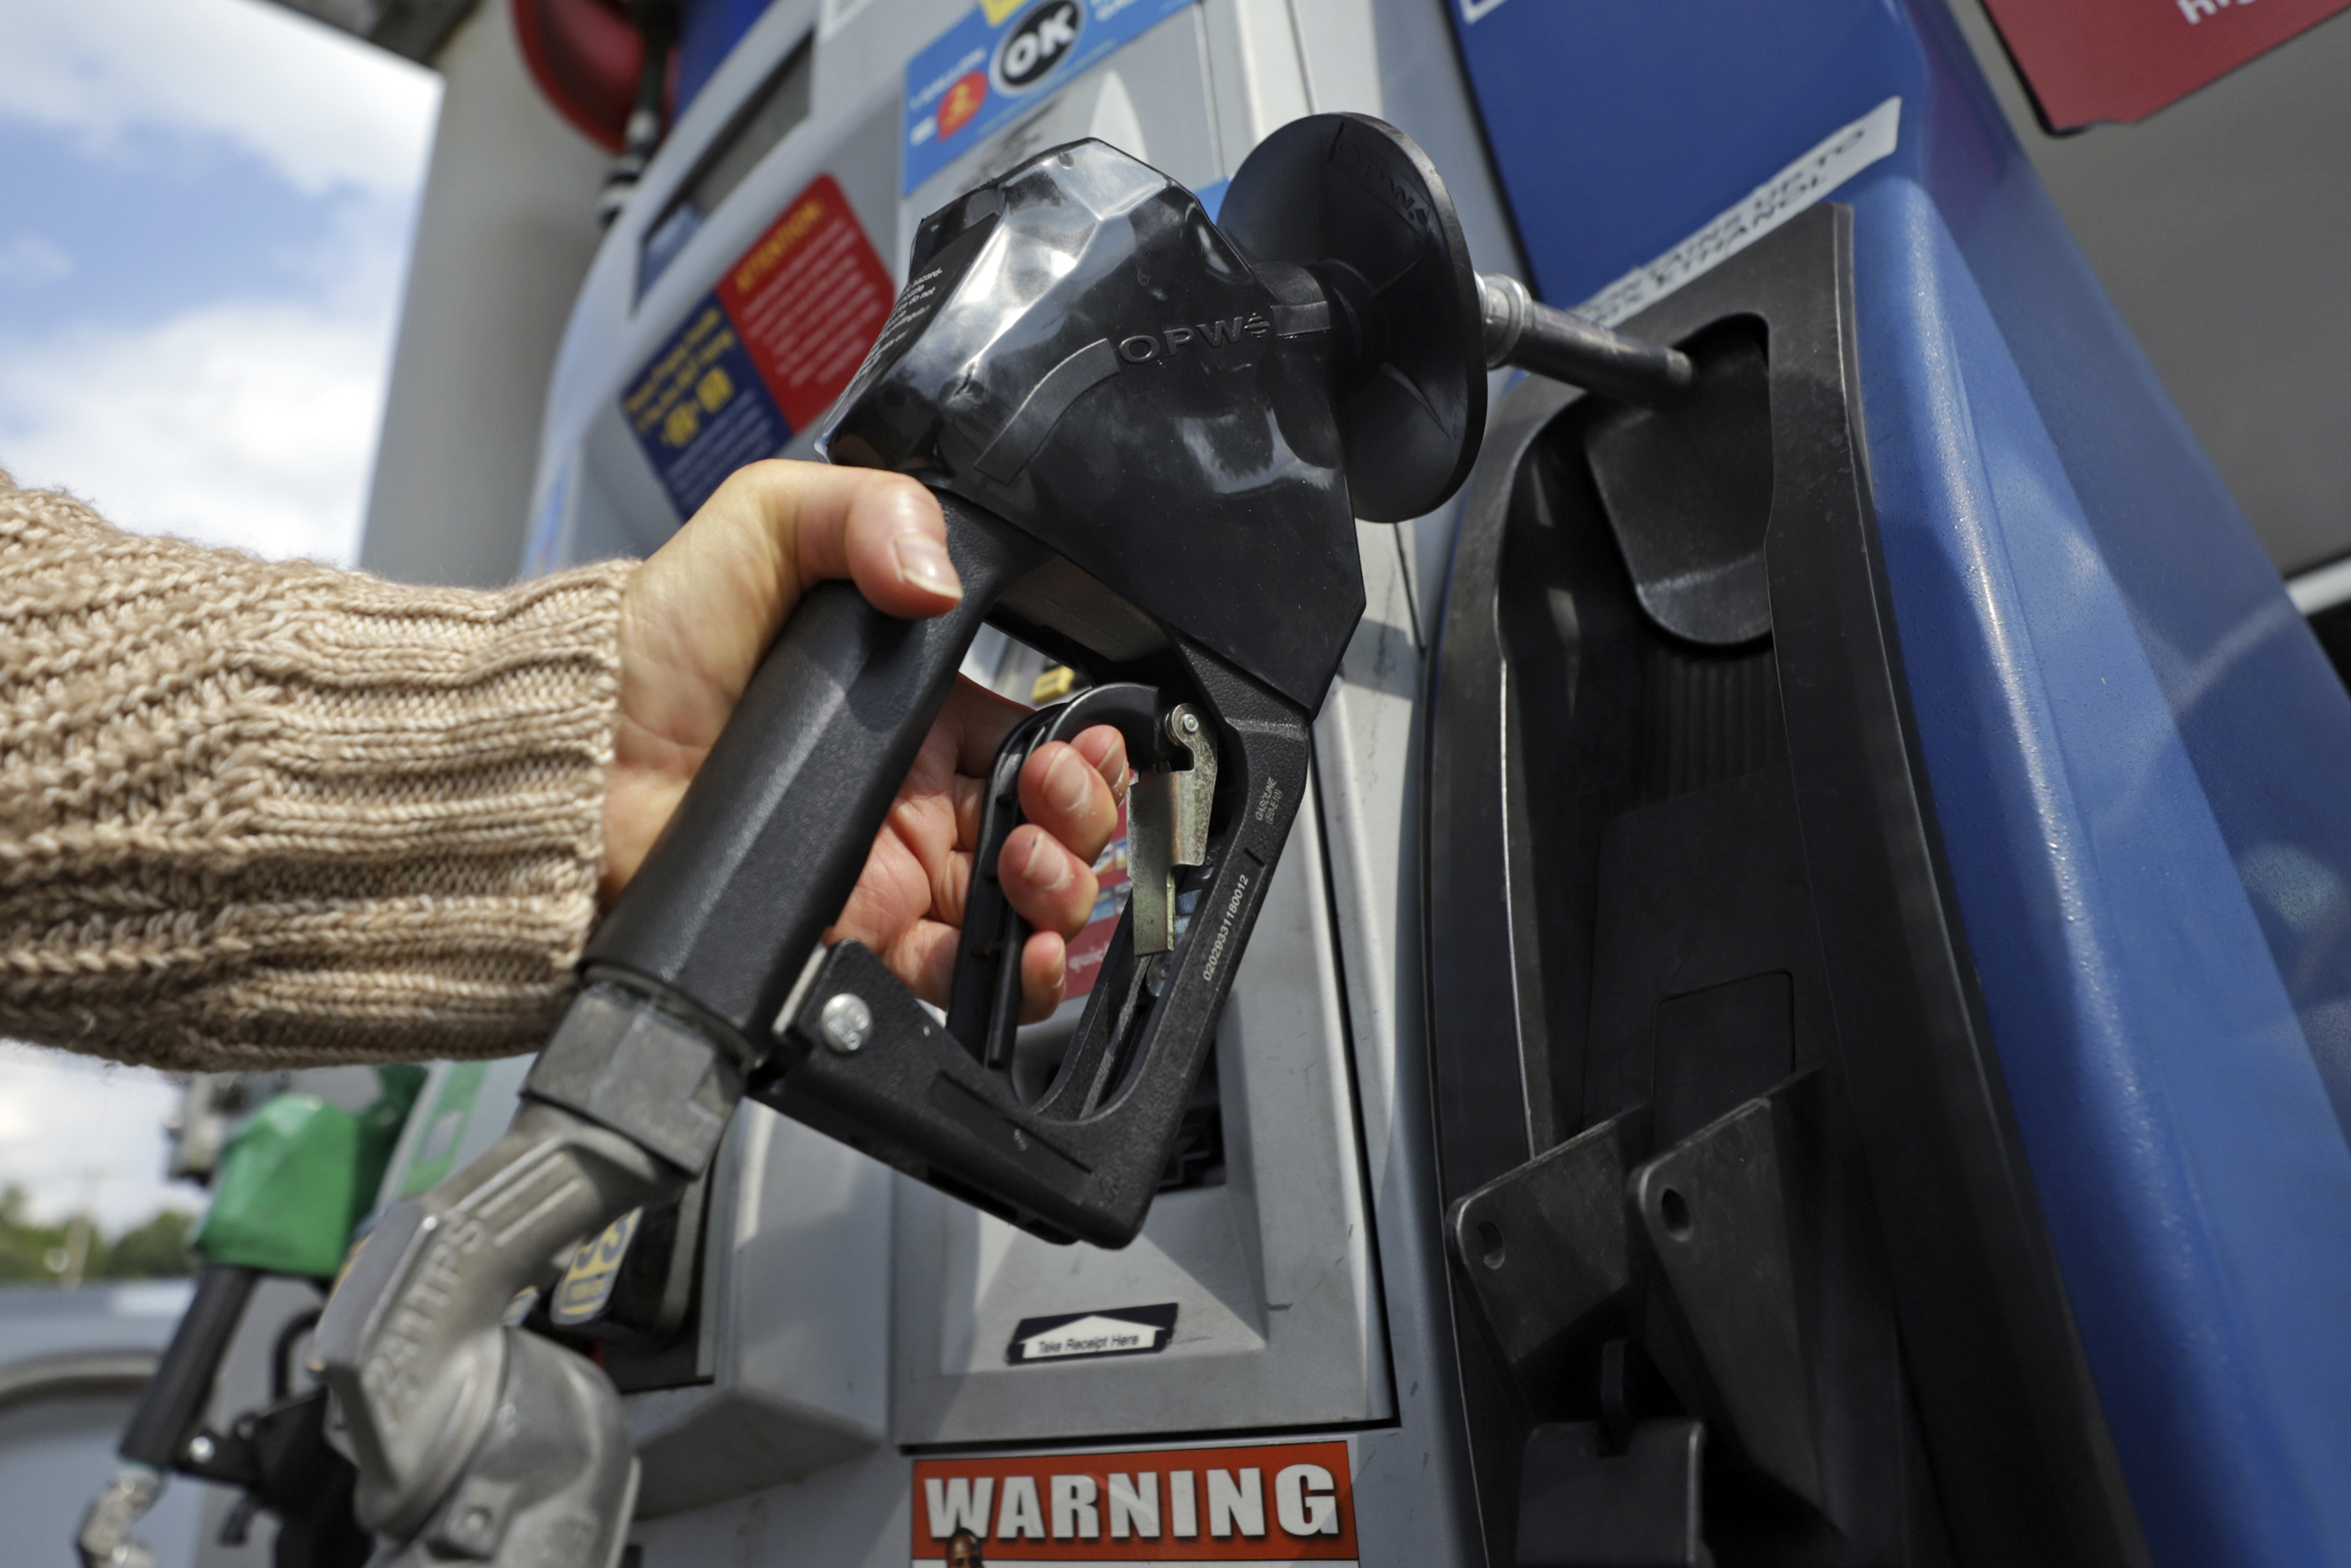 A woman pumps gas at a gas pump at a convenience store in Pittsburgh Monday, Sept. 16, 2019. Gas prices in the U.S. are already increasing. (Gene J. Puskar/AP)